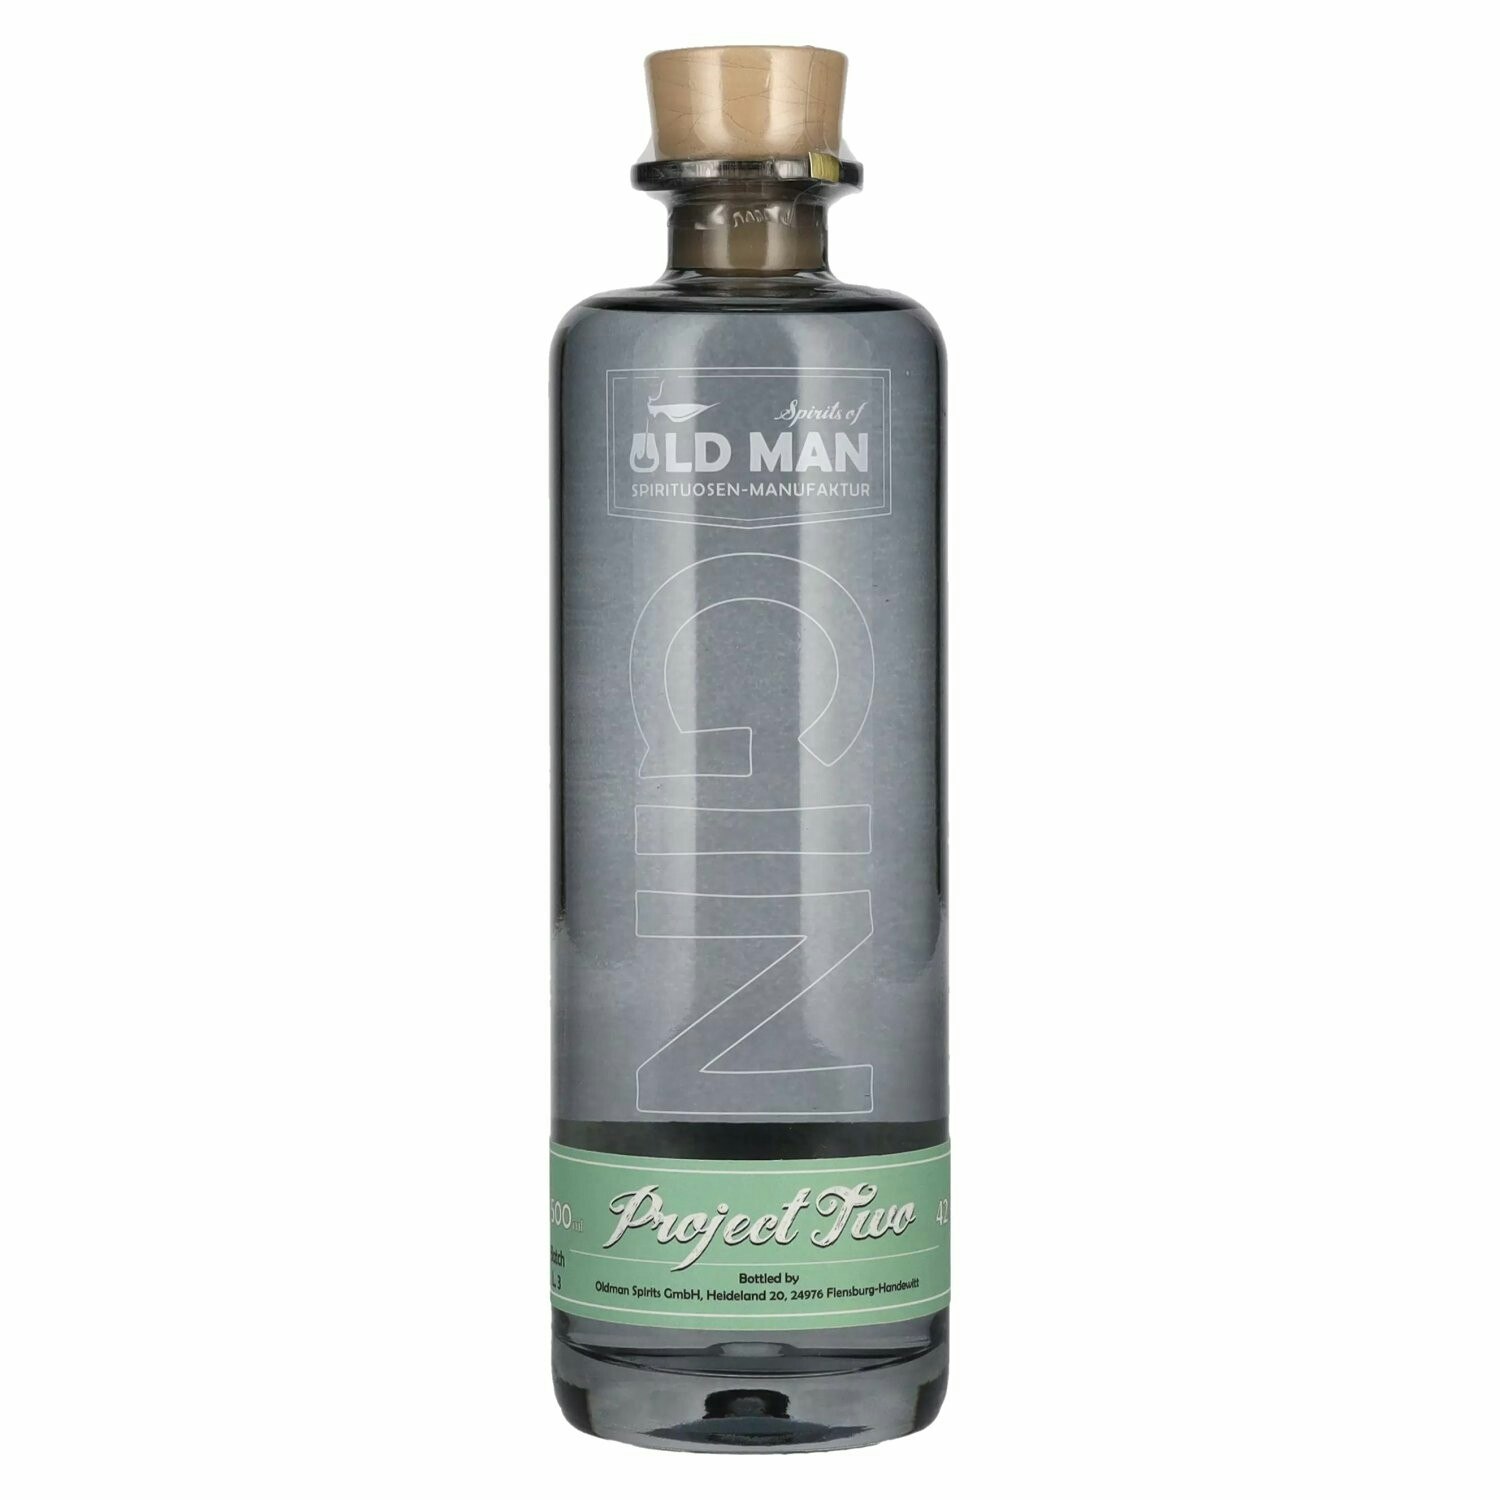 Spirits of Old Man Gin PROJECT TWO Apfel & Gurke 42% Vol. 0,5l